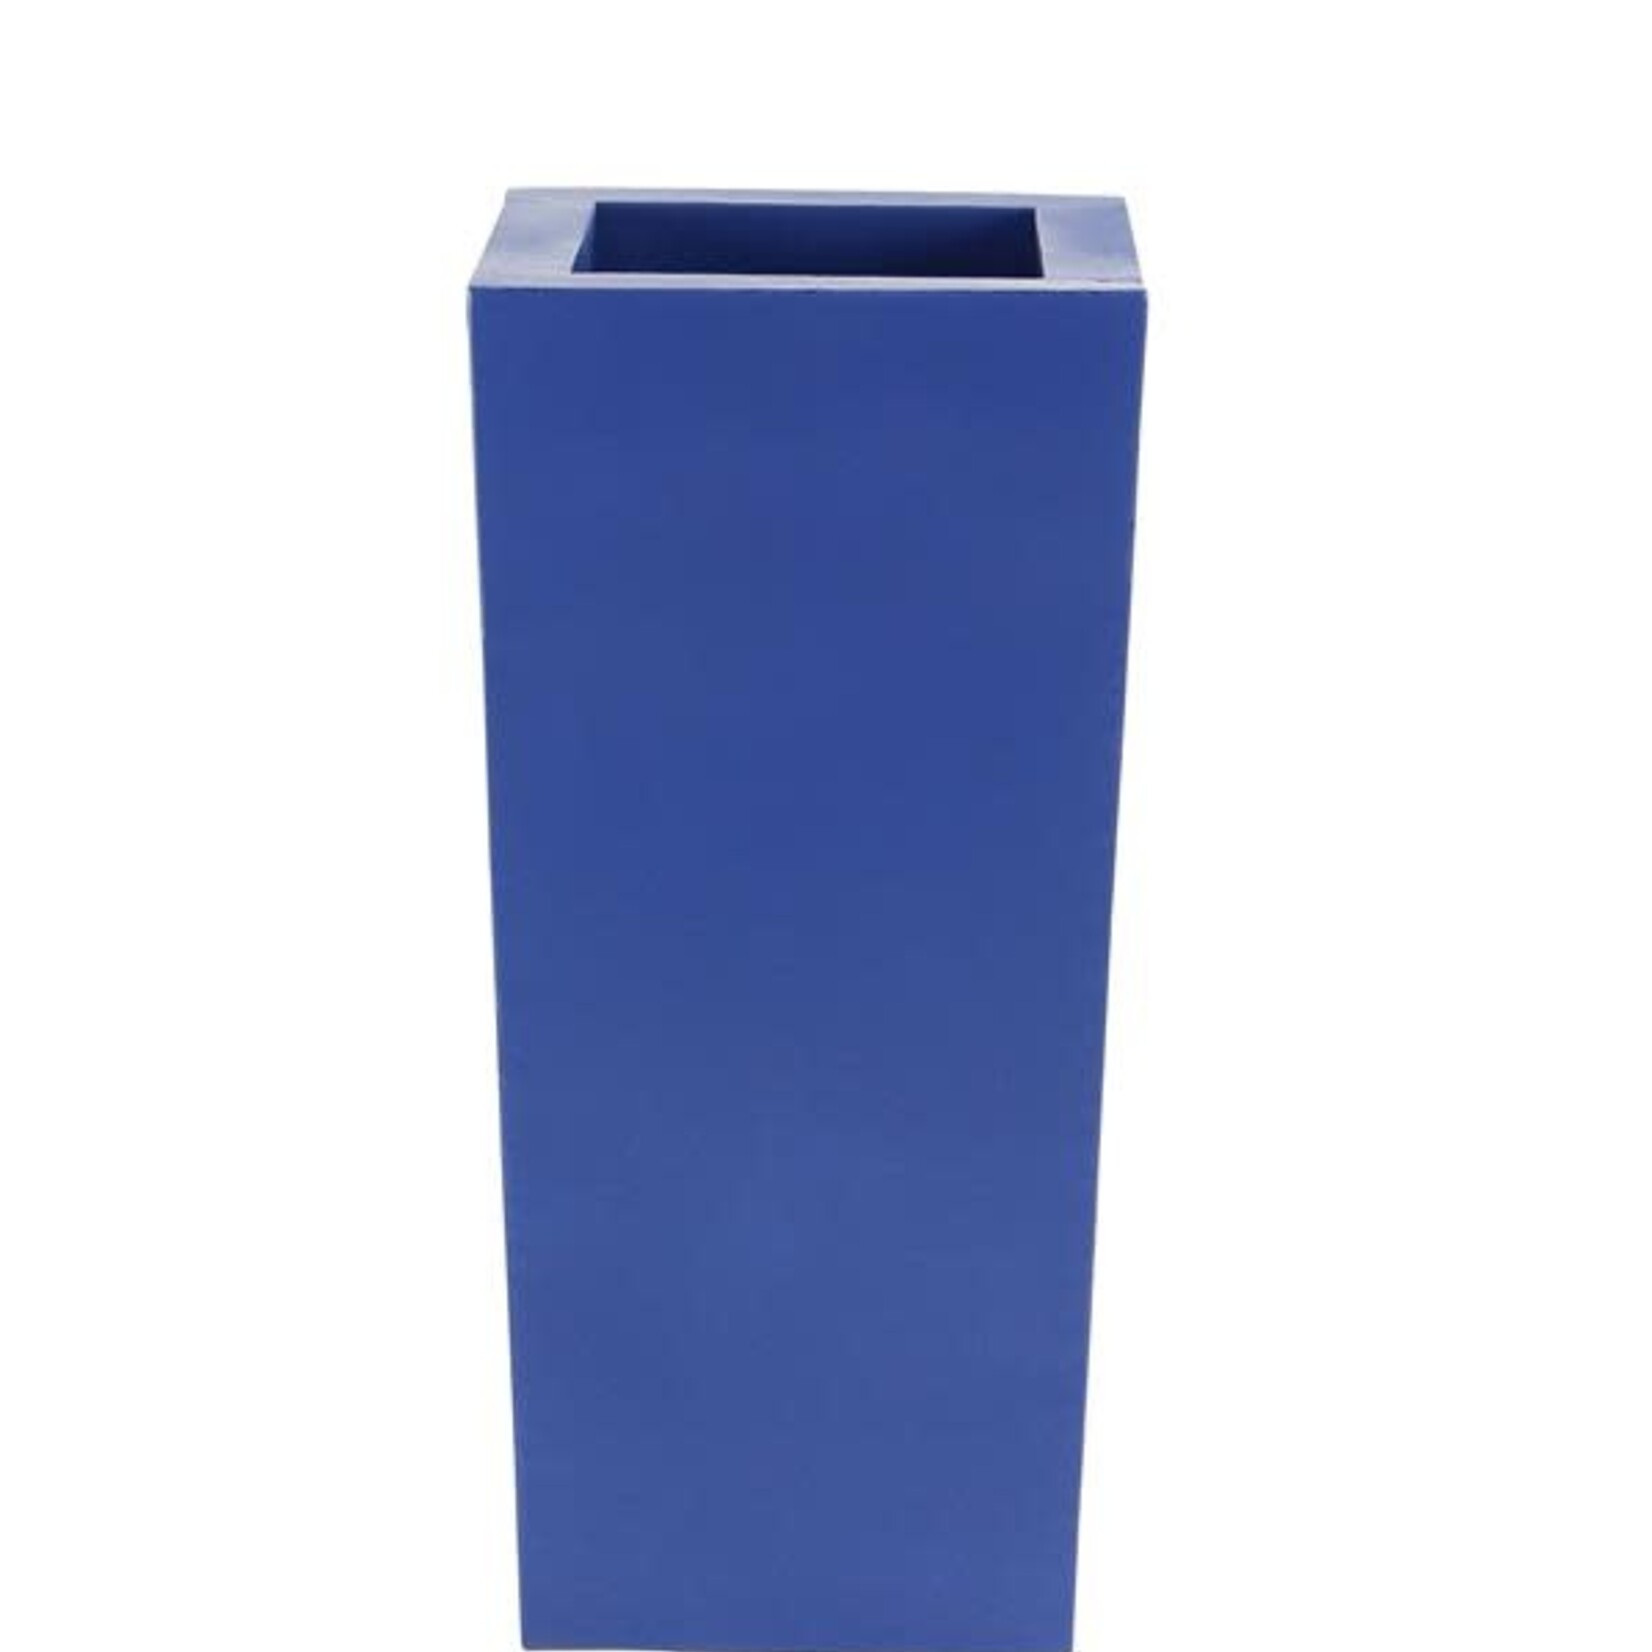 60% off was $150 now $60, 25” X 12” BLUE TAPER METAL PLANTERS